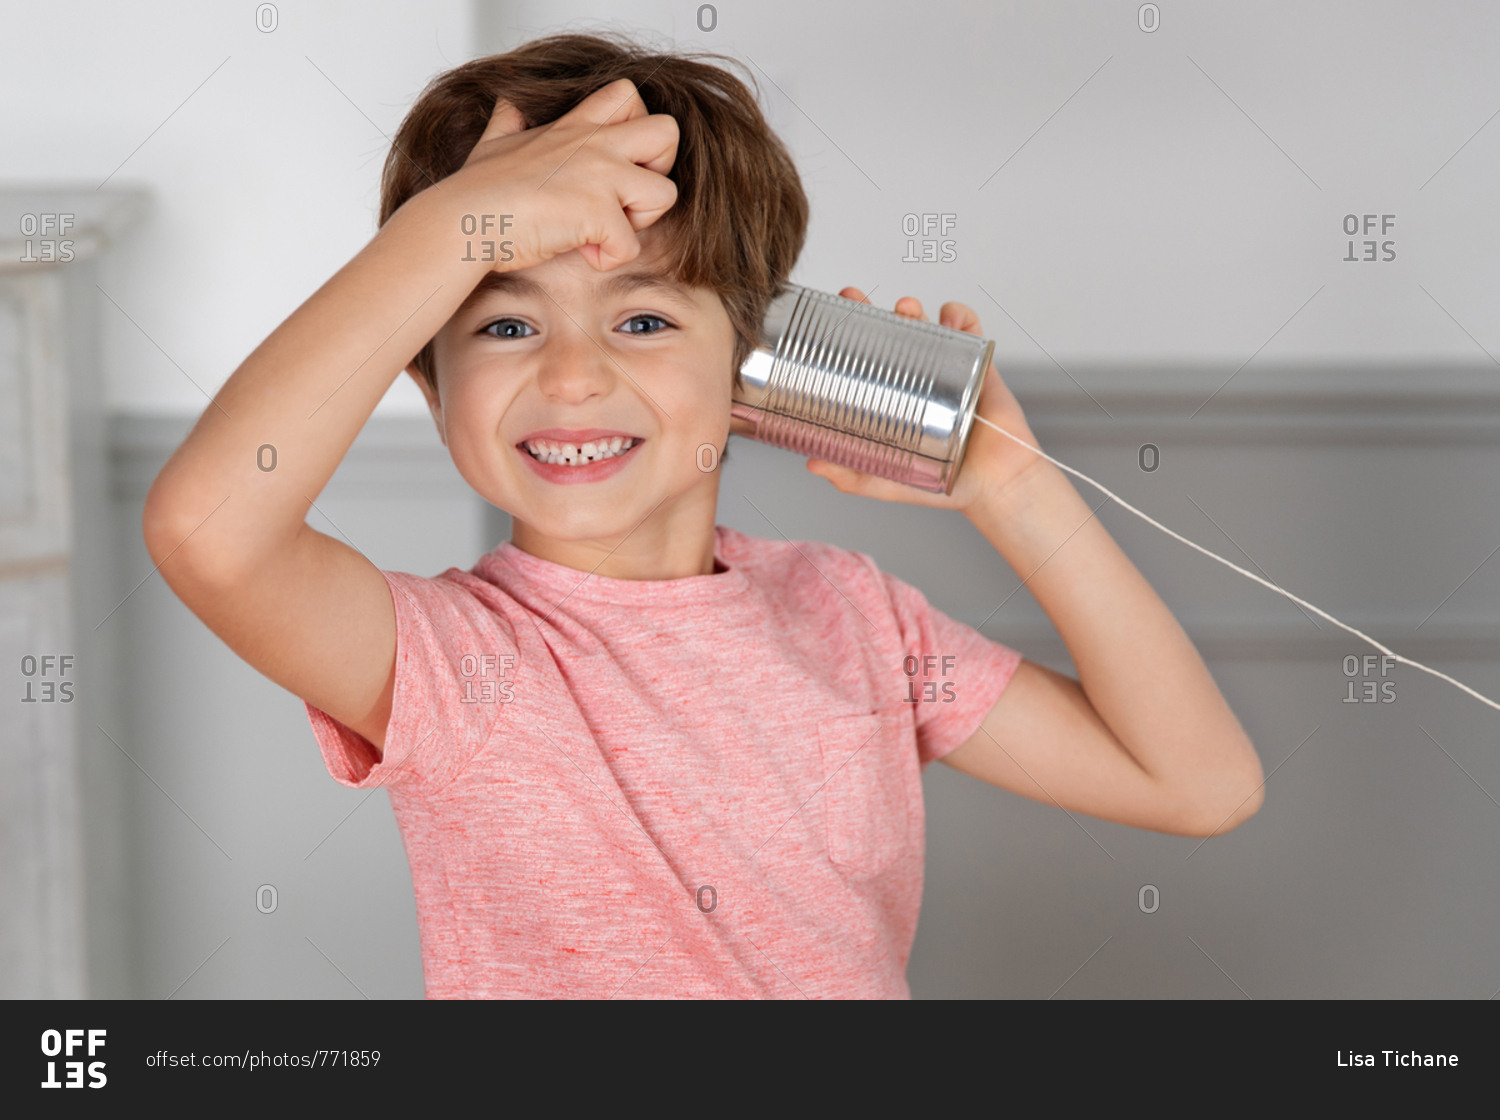 Smiling boy listening to toy telephone made with tin can and string